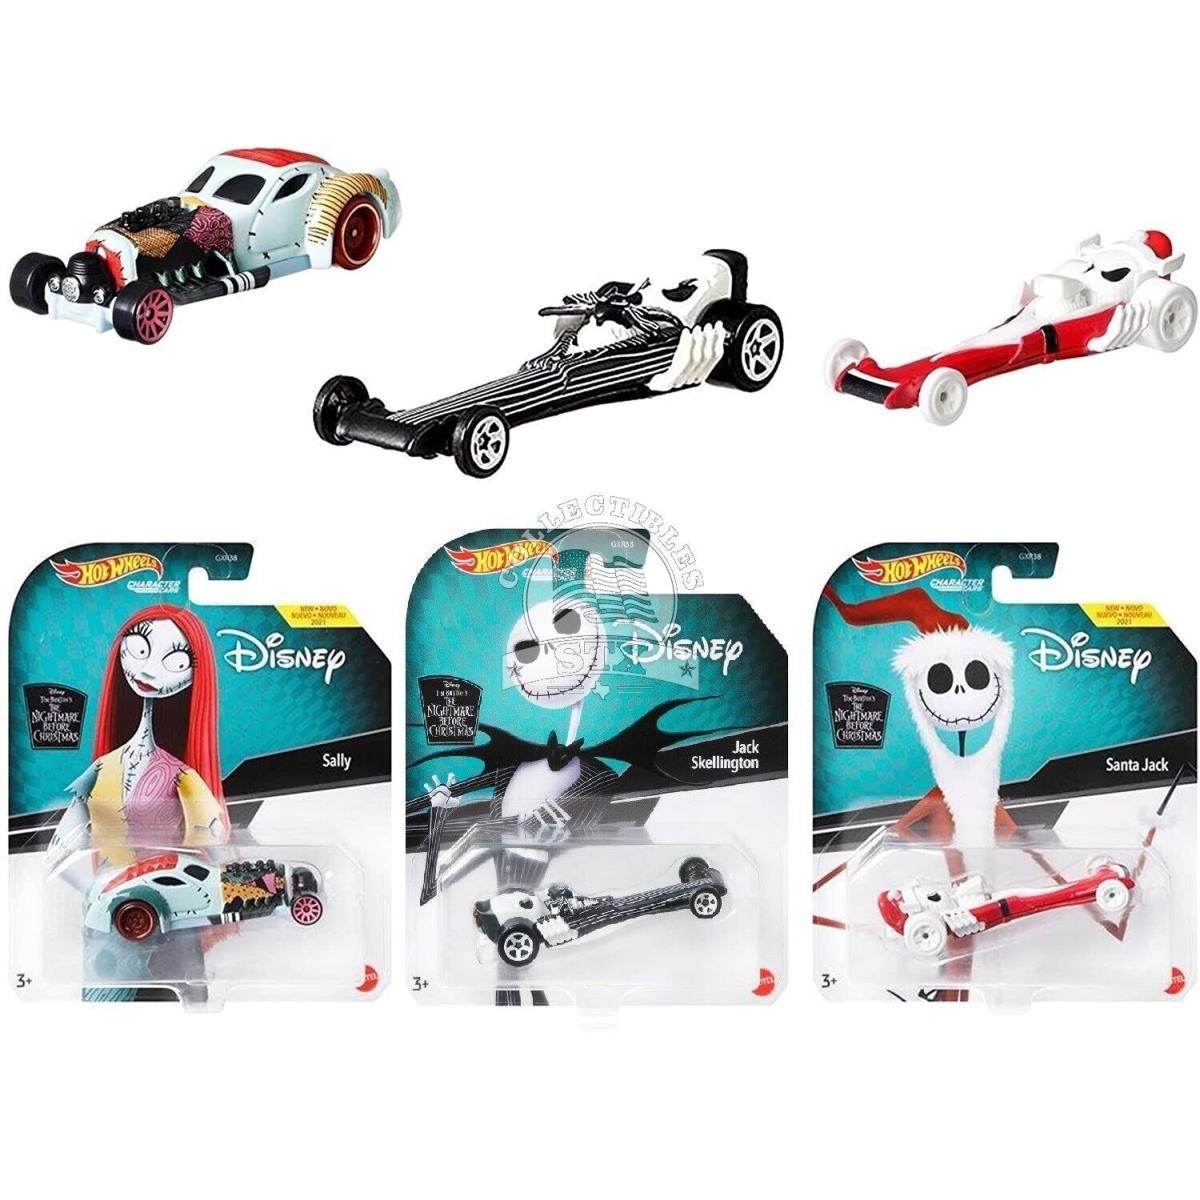 2021 Hot Wheels - Character Cars - The Nightmare Before Christmas 3pc Set